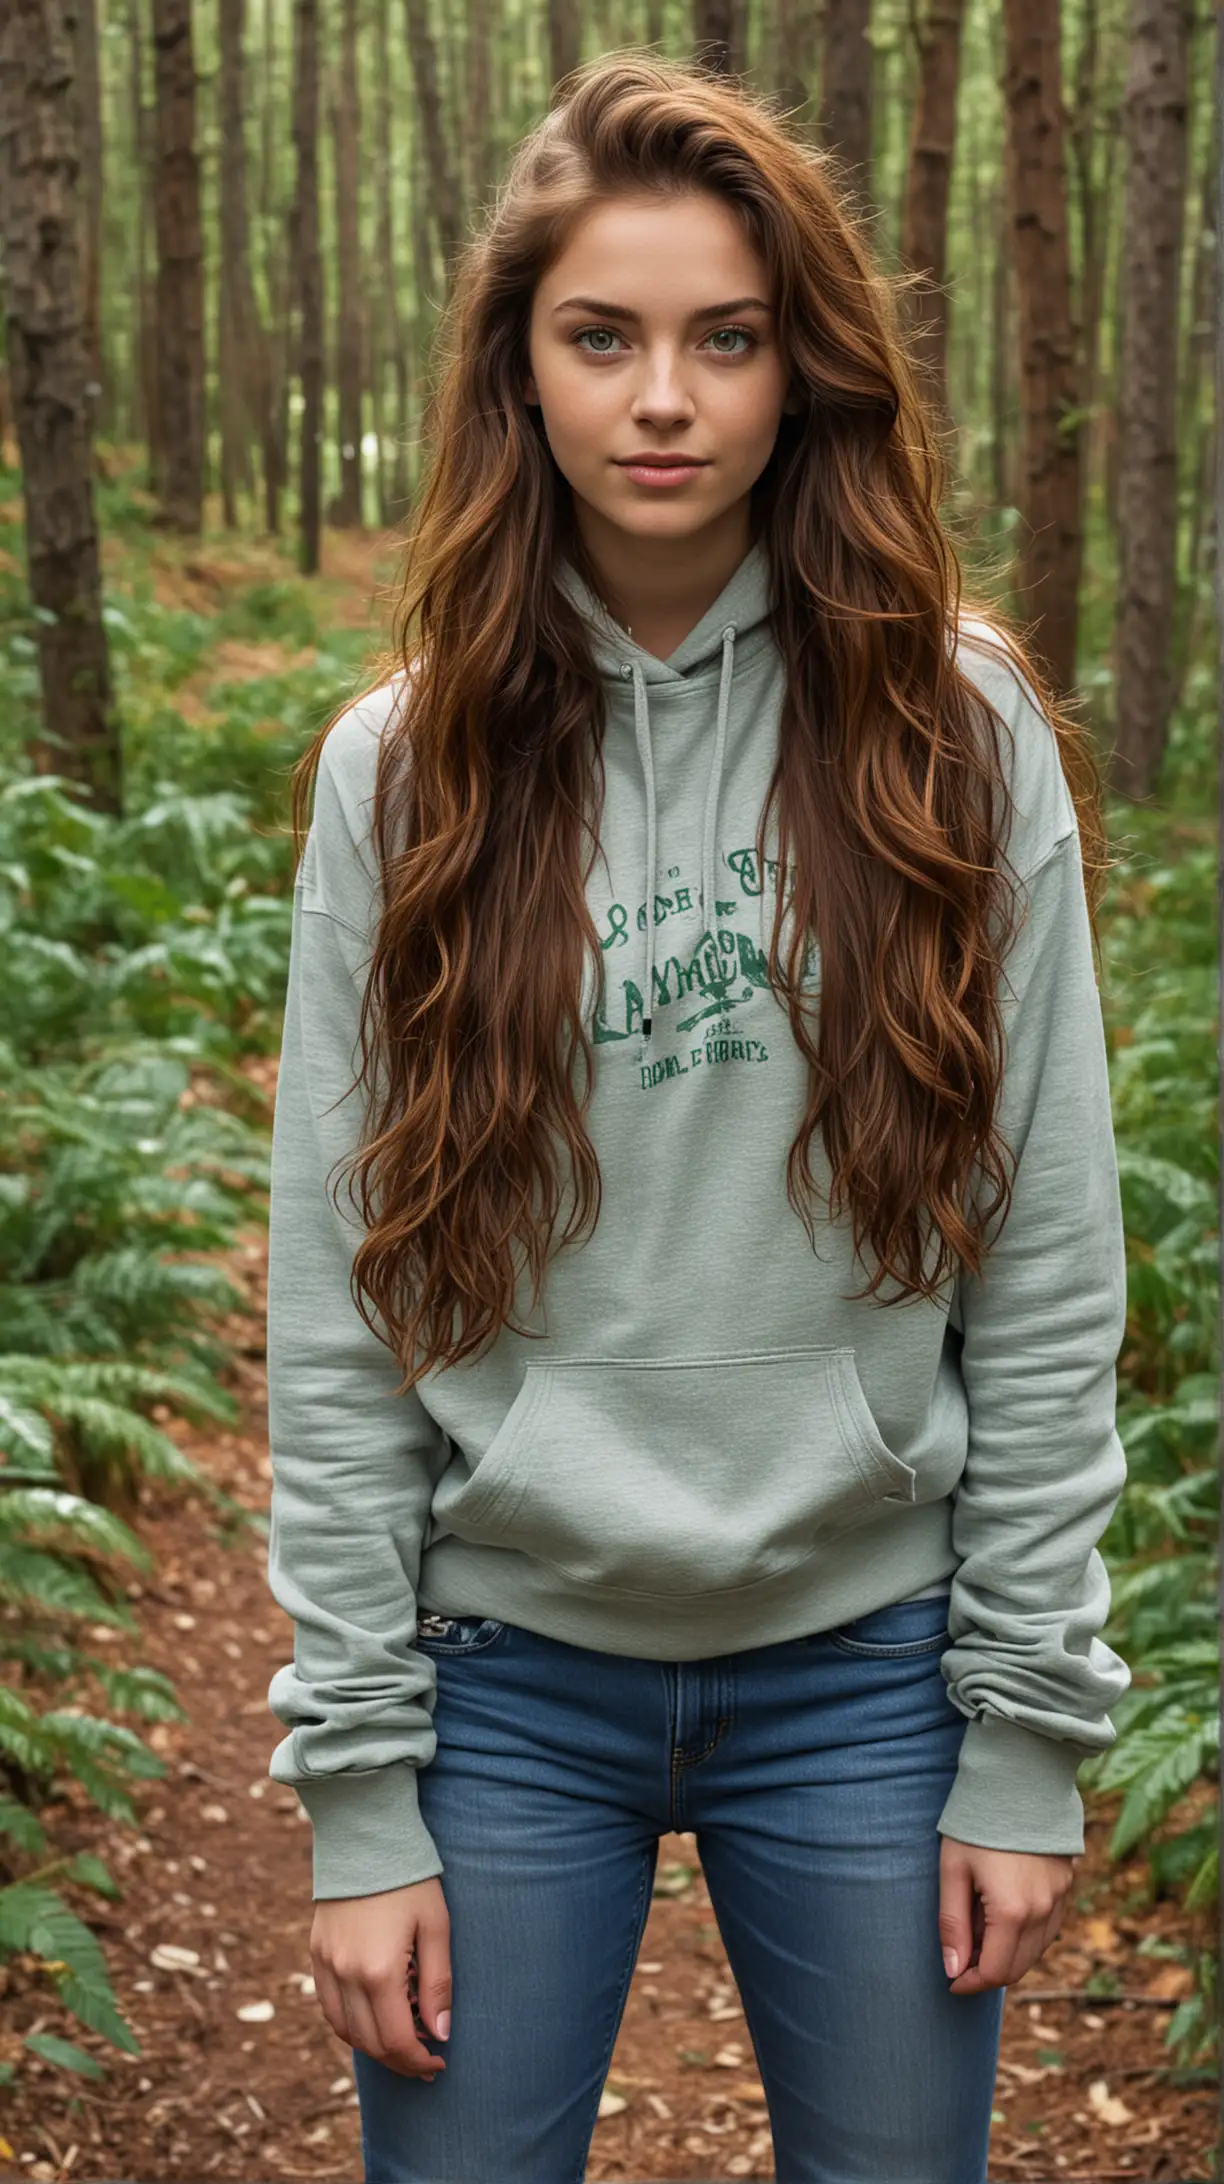 18-year-old Julie Roberts. She has long, wavy, dark-auburn hair and intense green eyes. She is wearing jeans and a hoodie as she walks through a forest